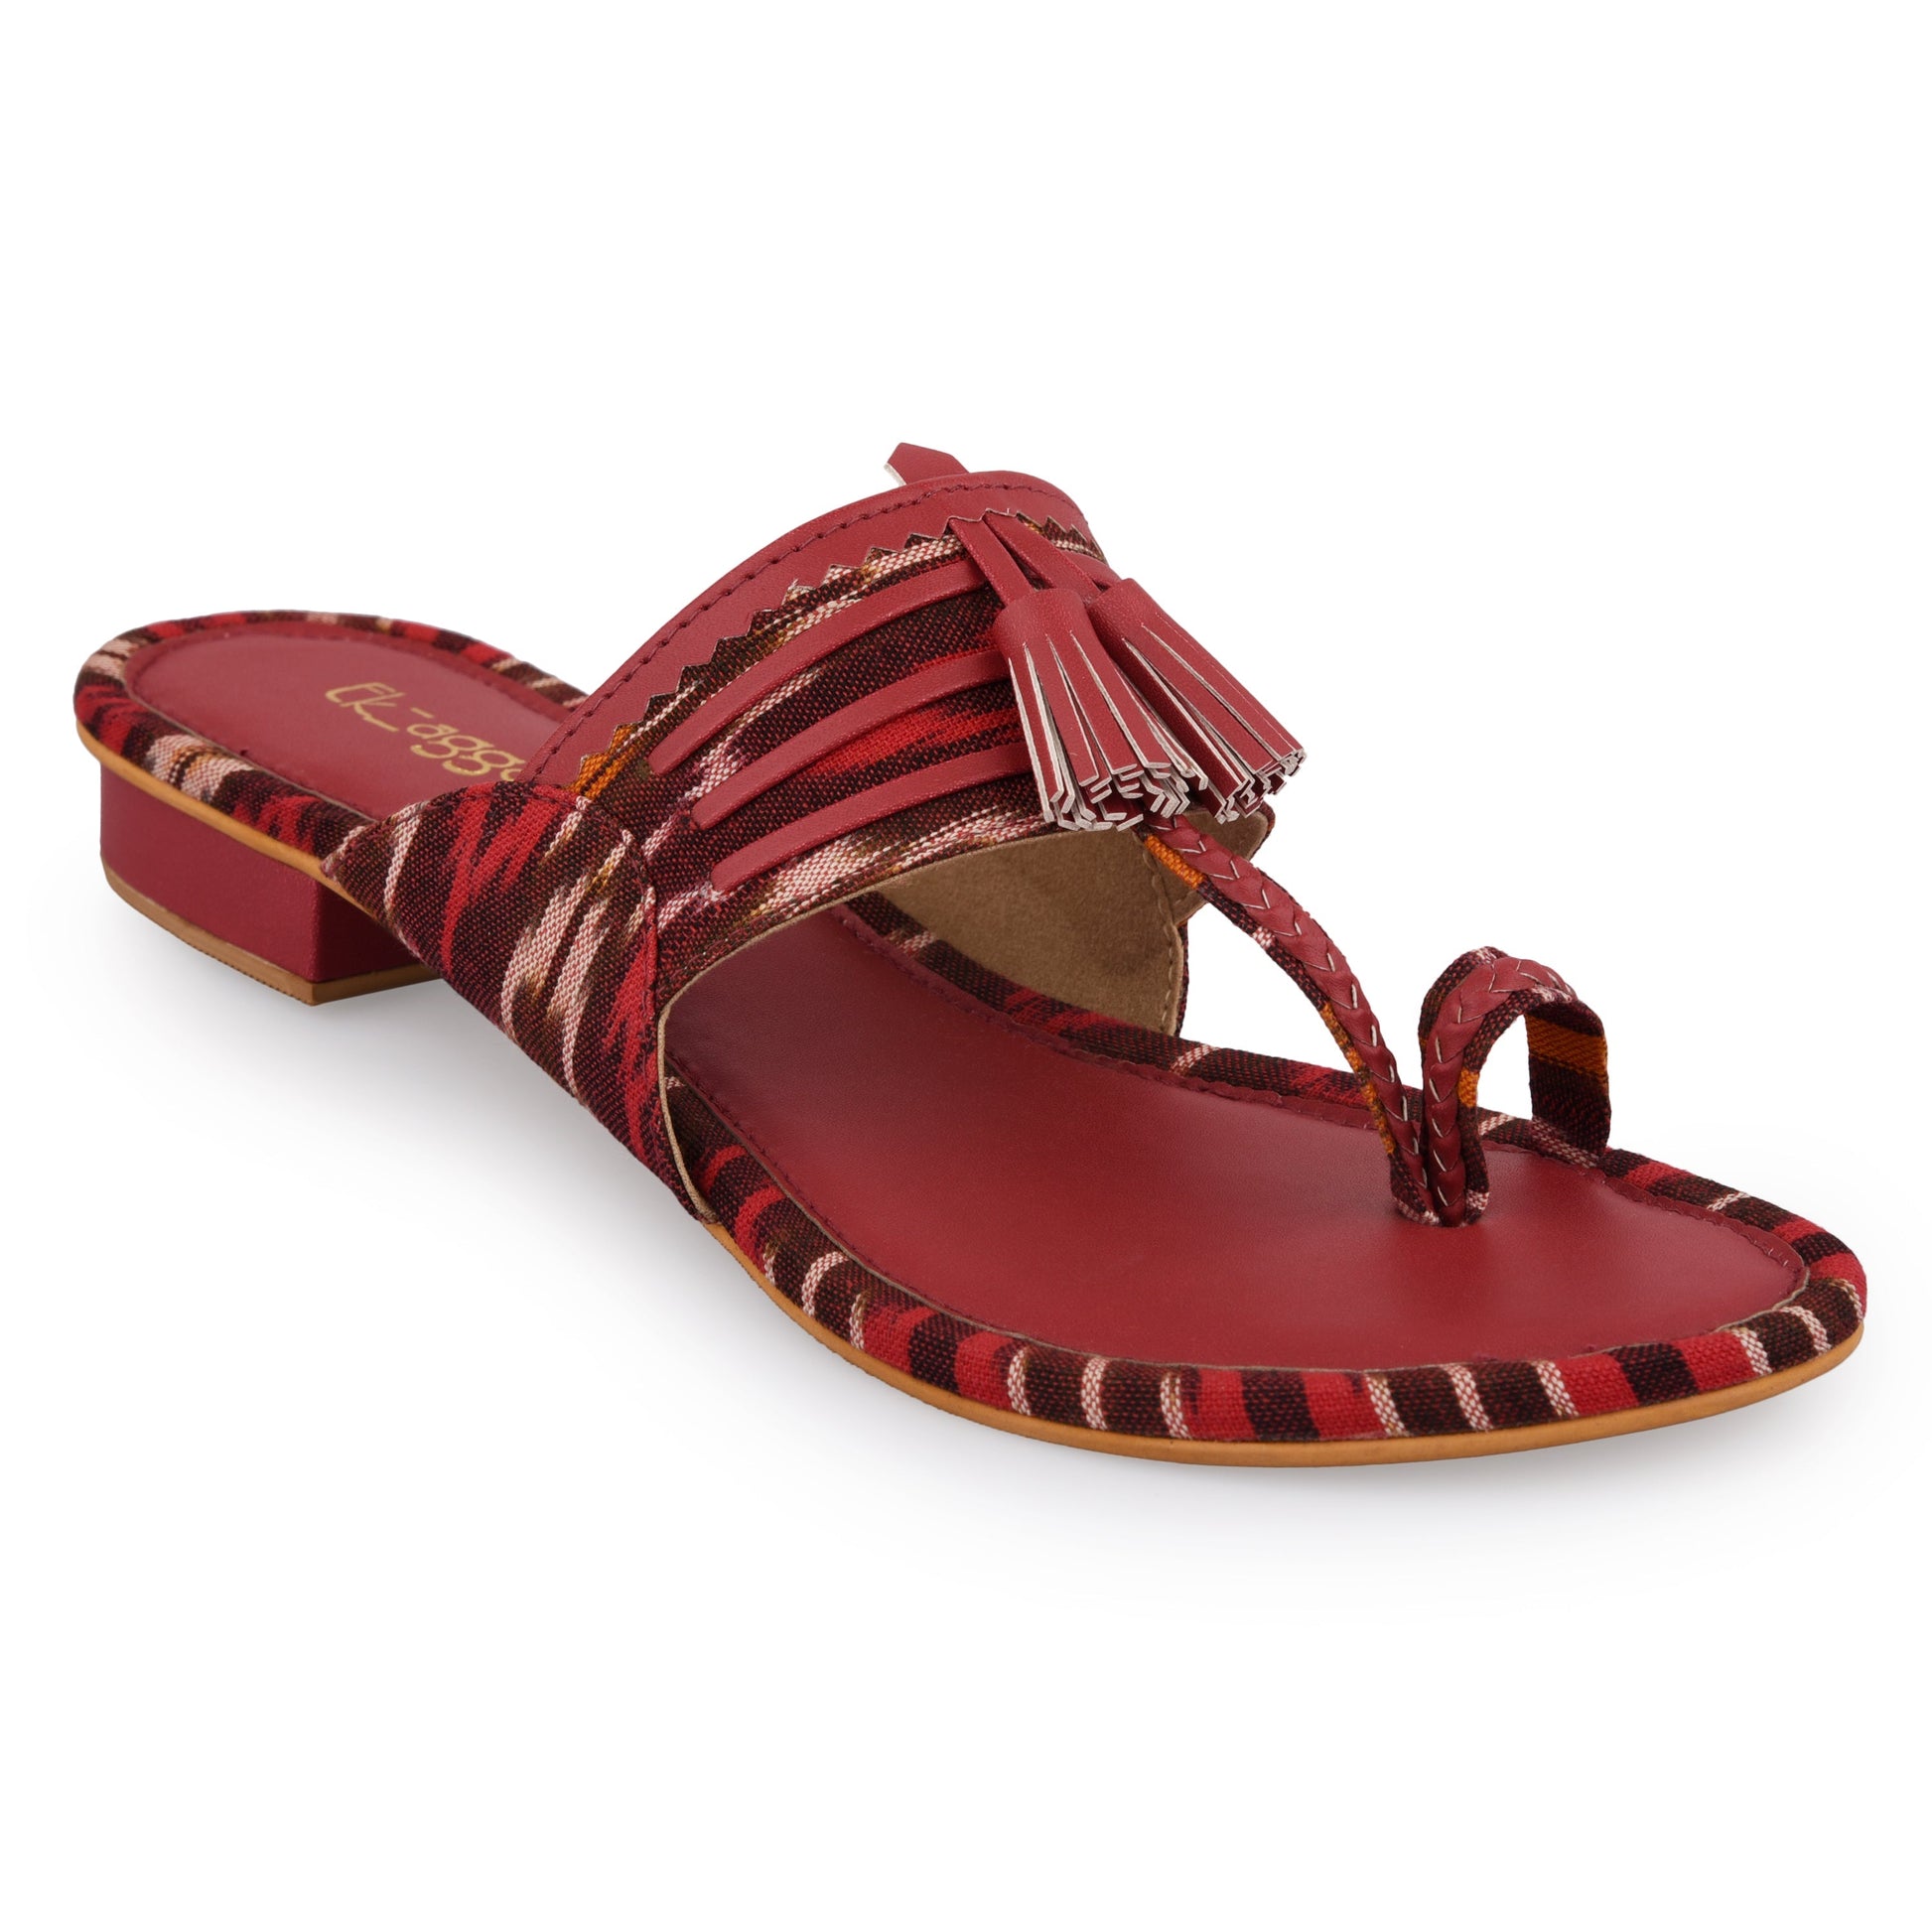 Ikat Kolhapuri by EK_agga with Casual Wear, Flats, Ikat Print, Not Priced, Open Toes, Patent leather, Pink, Red, Regular Fit, Textured, Toe Loop, Vegan at Kamakhyaa for sustainable fashion